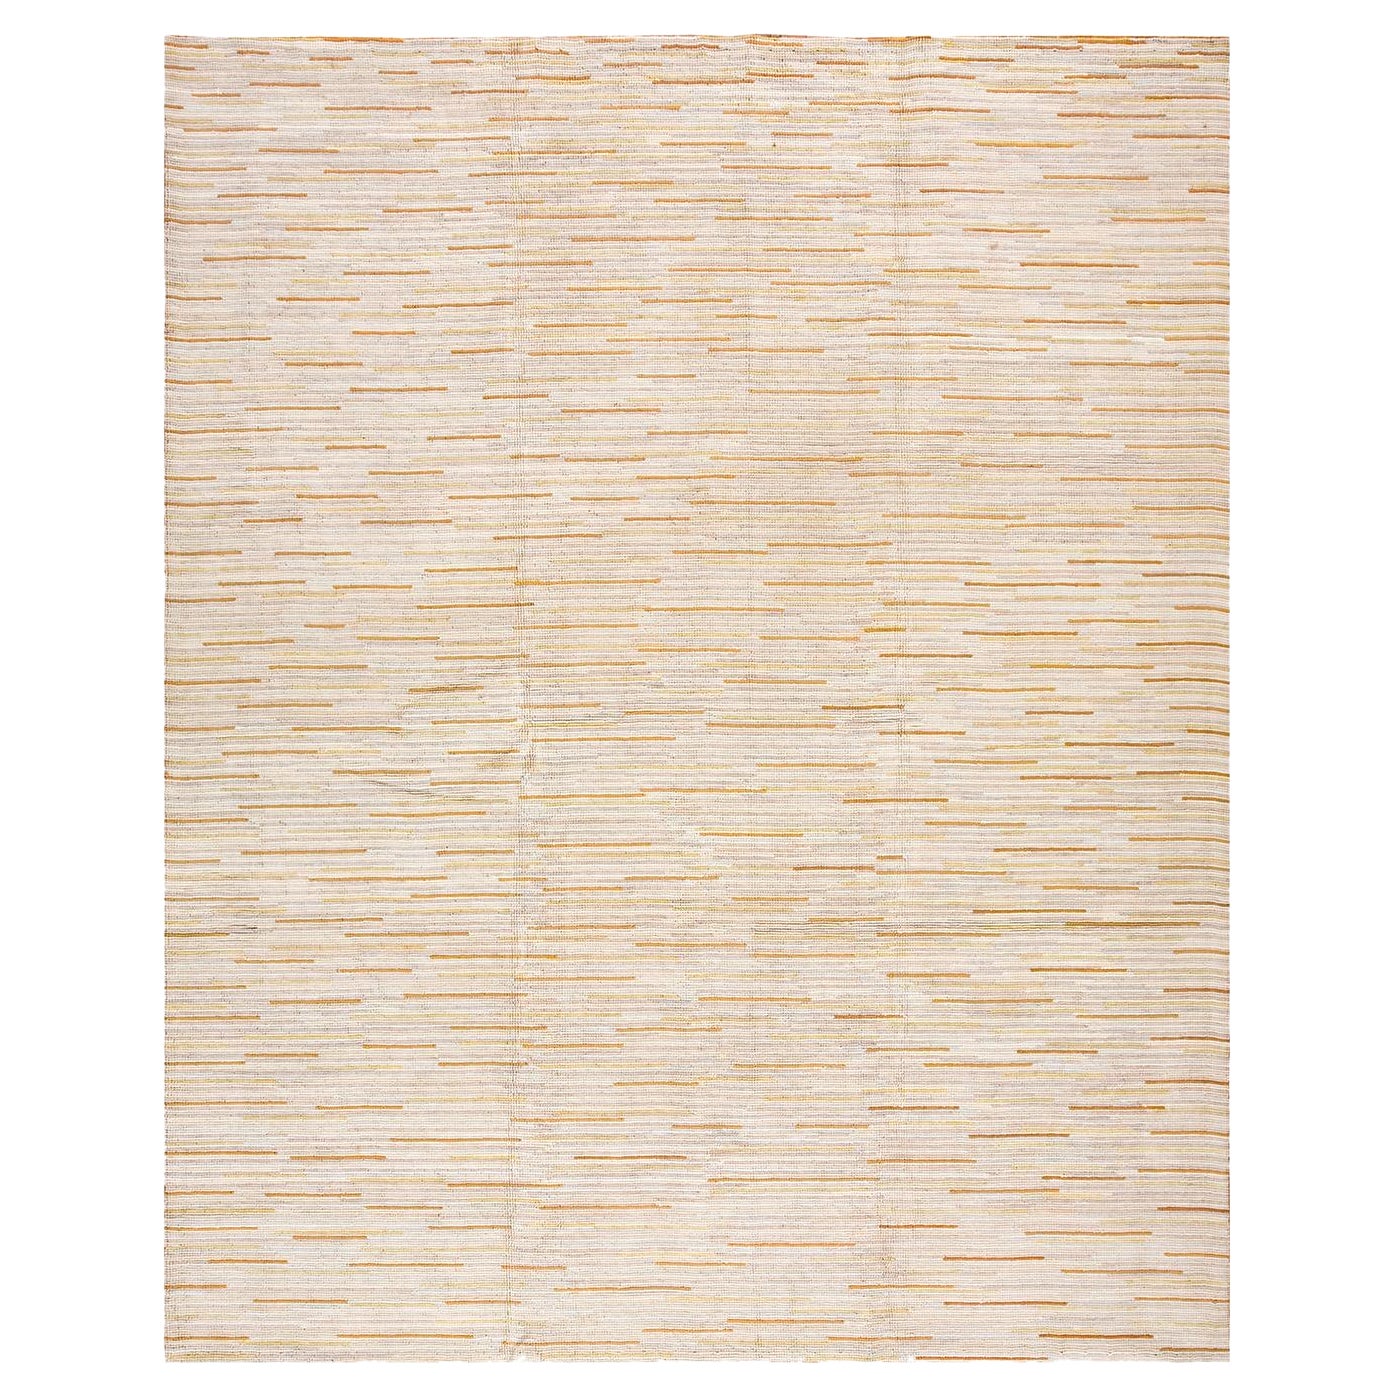 Contemporary American Cotton Hooked Rug (6' x 9' 183 x 274 cm)